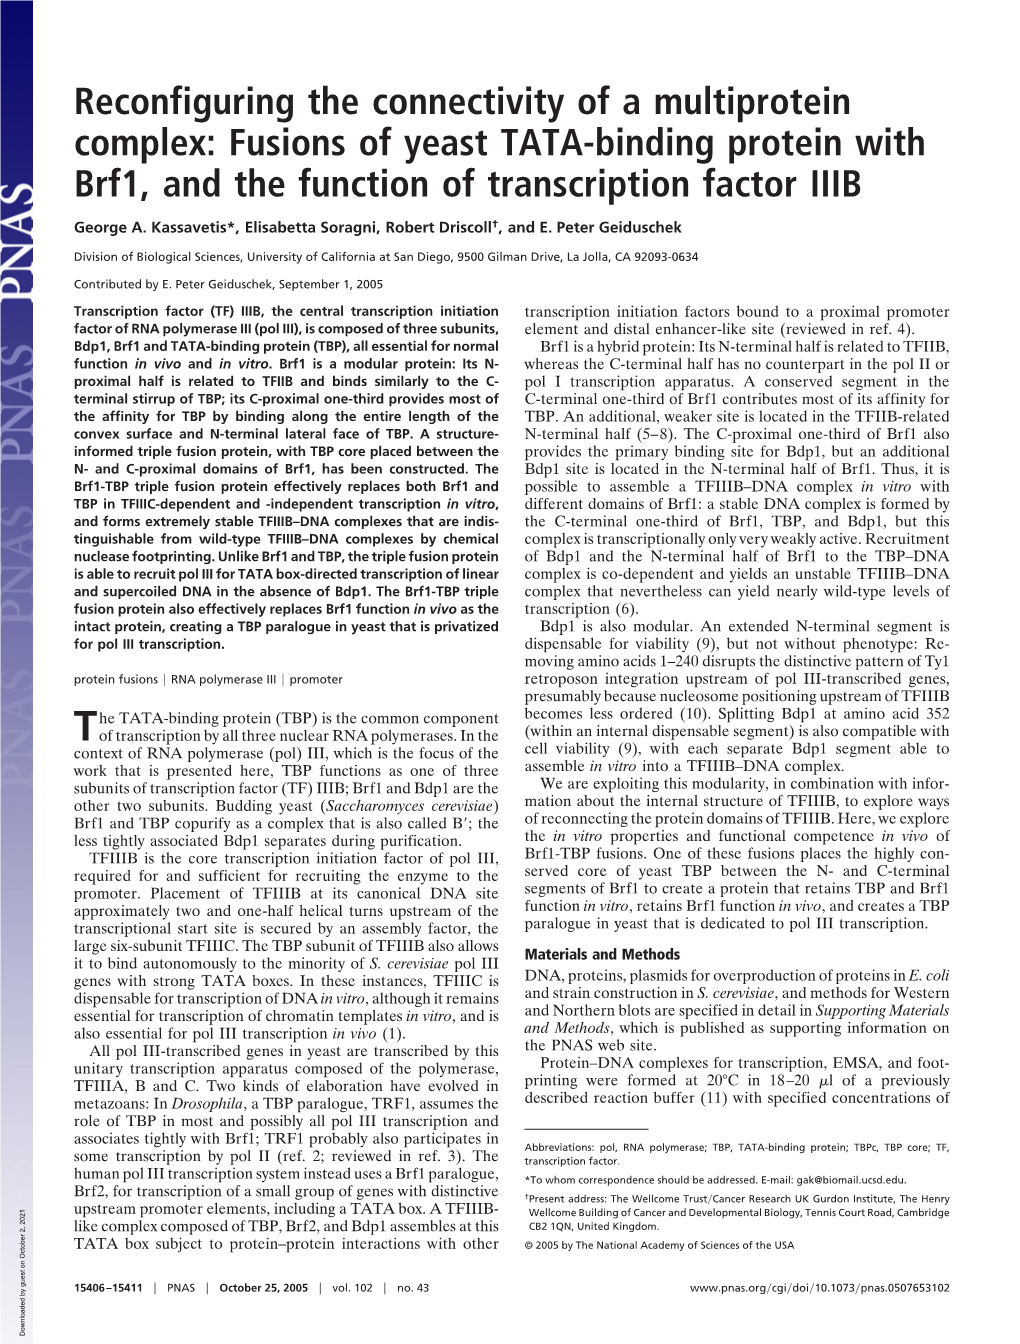 Fusions of Yeast TATA-Binding Protein with Brf1, and the Function of Transcription Factor IIIB